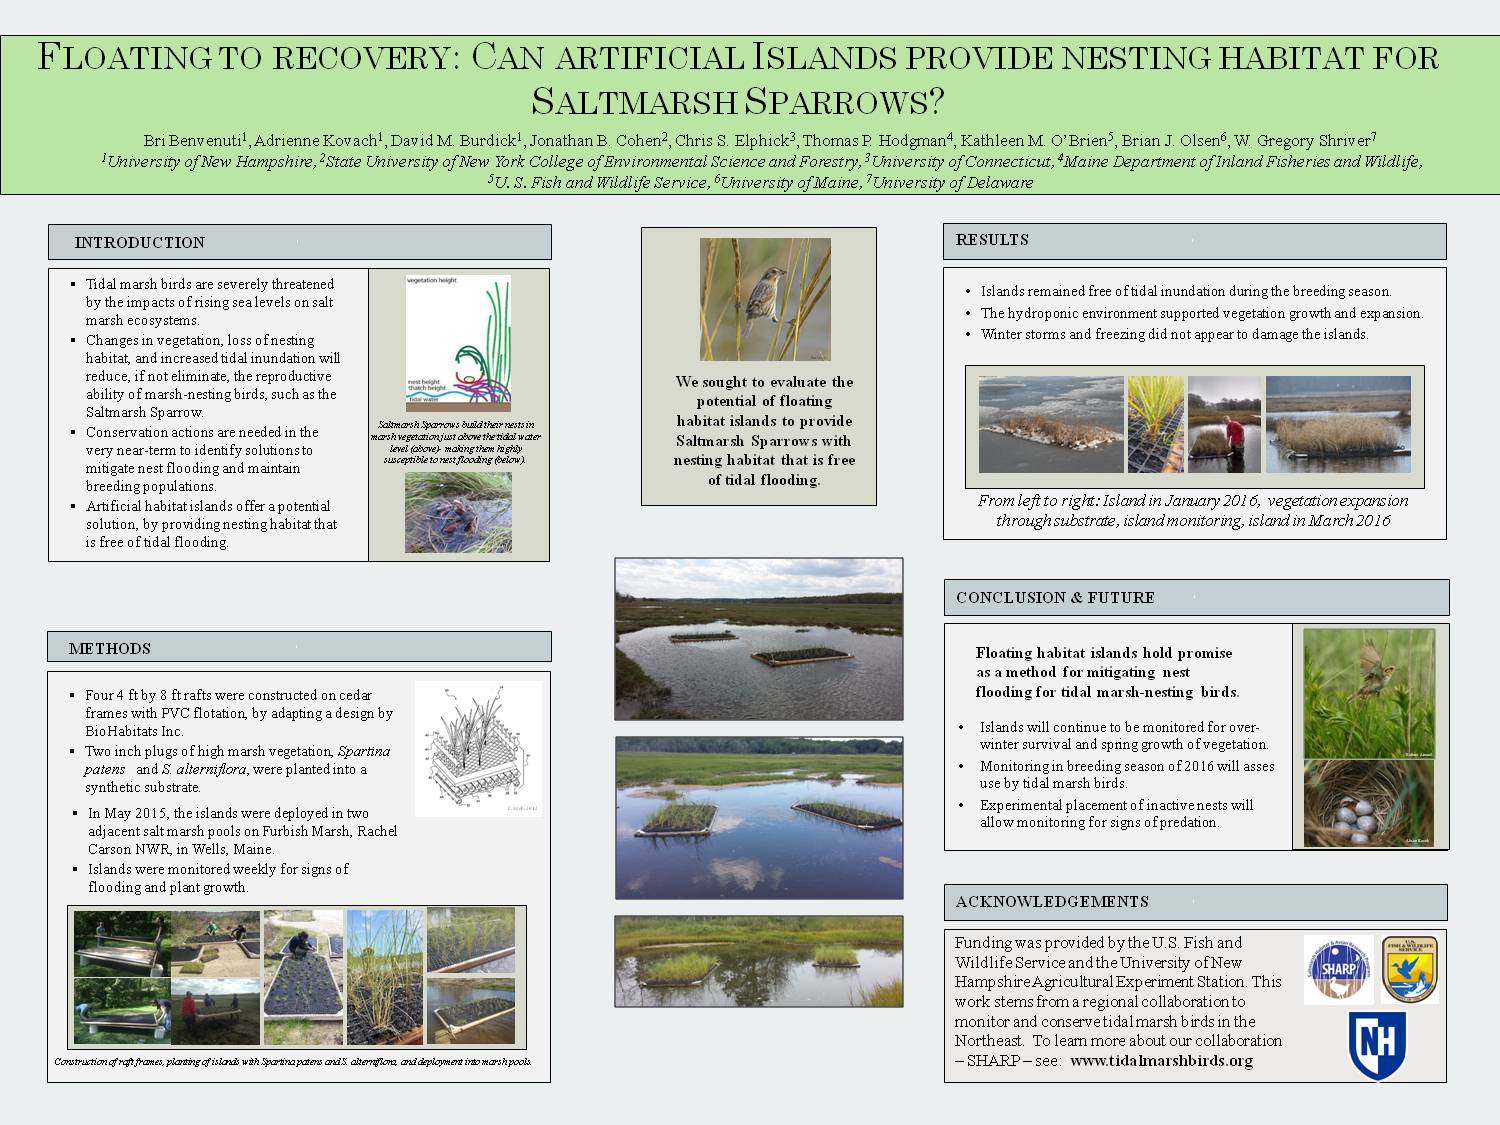 Floating To Recovery: Can Artificial Islands Provide Nesting Habitat For Saltmarsh Sparrows? by bar1